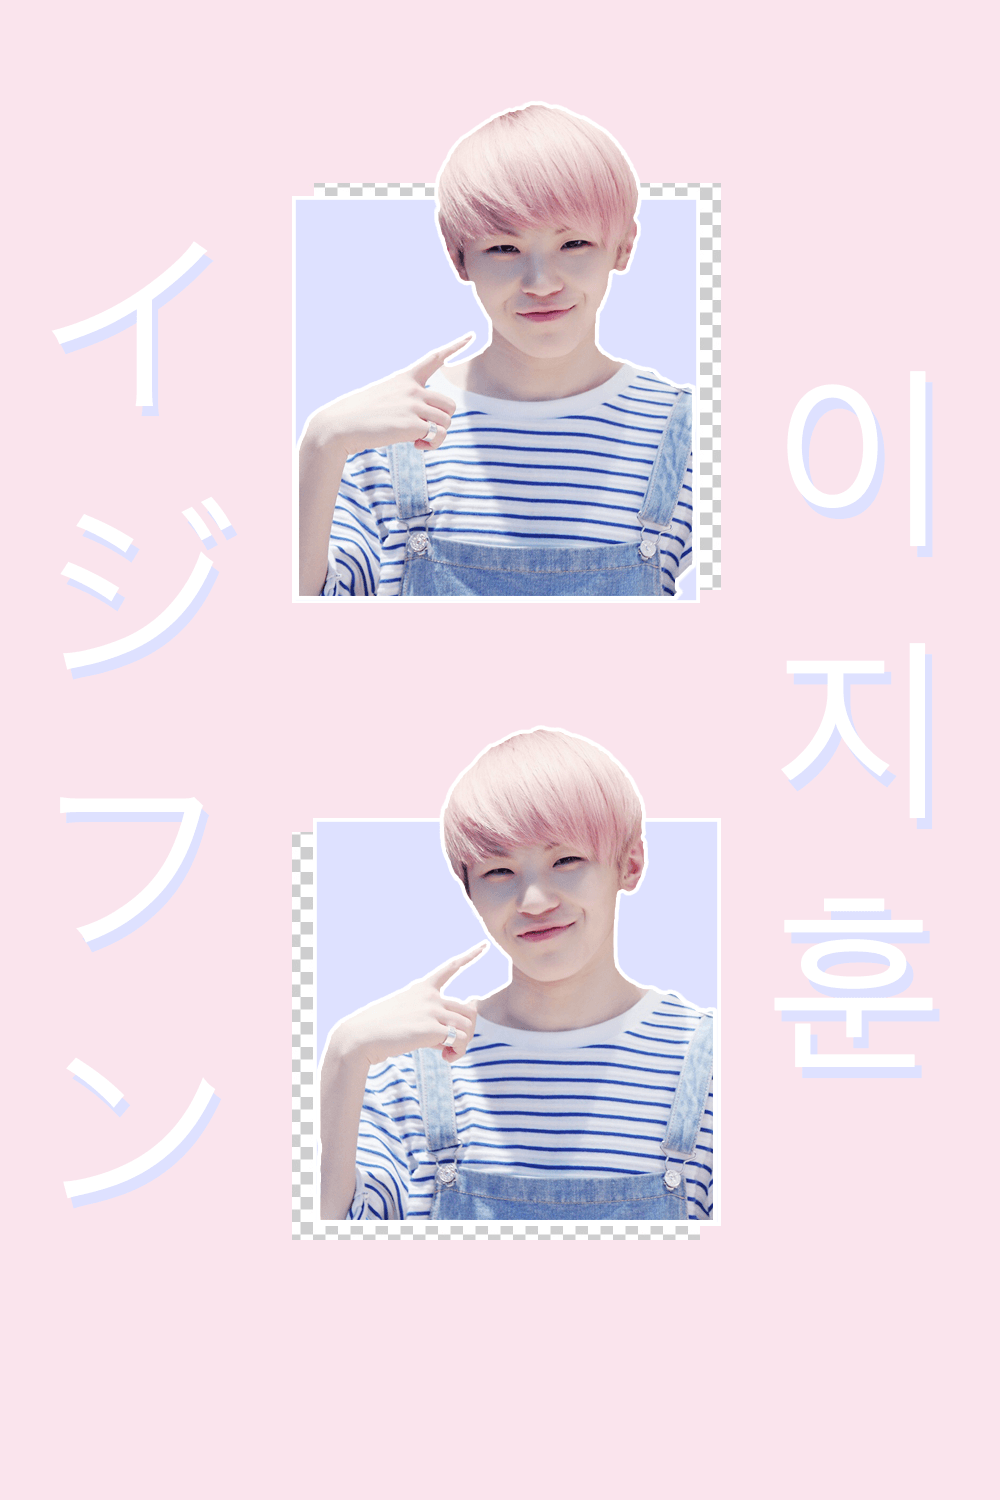 woozi #wallpaper. For those of you who want the rising producer as